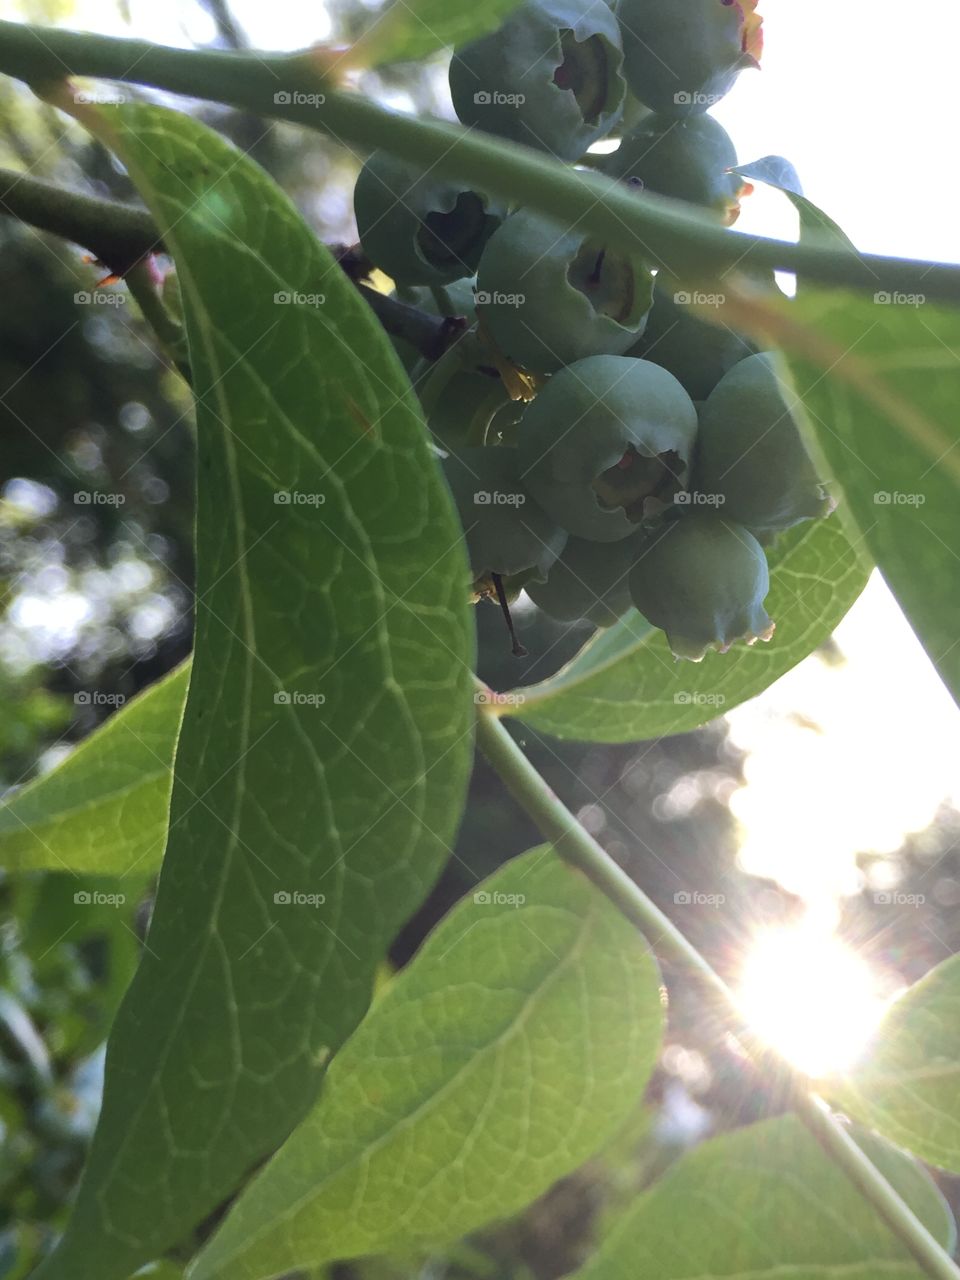 Sun and blueberries 